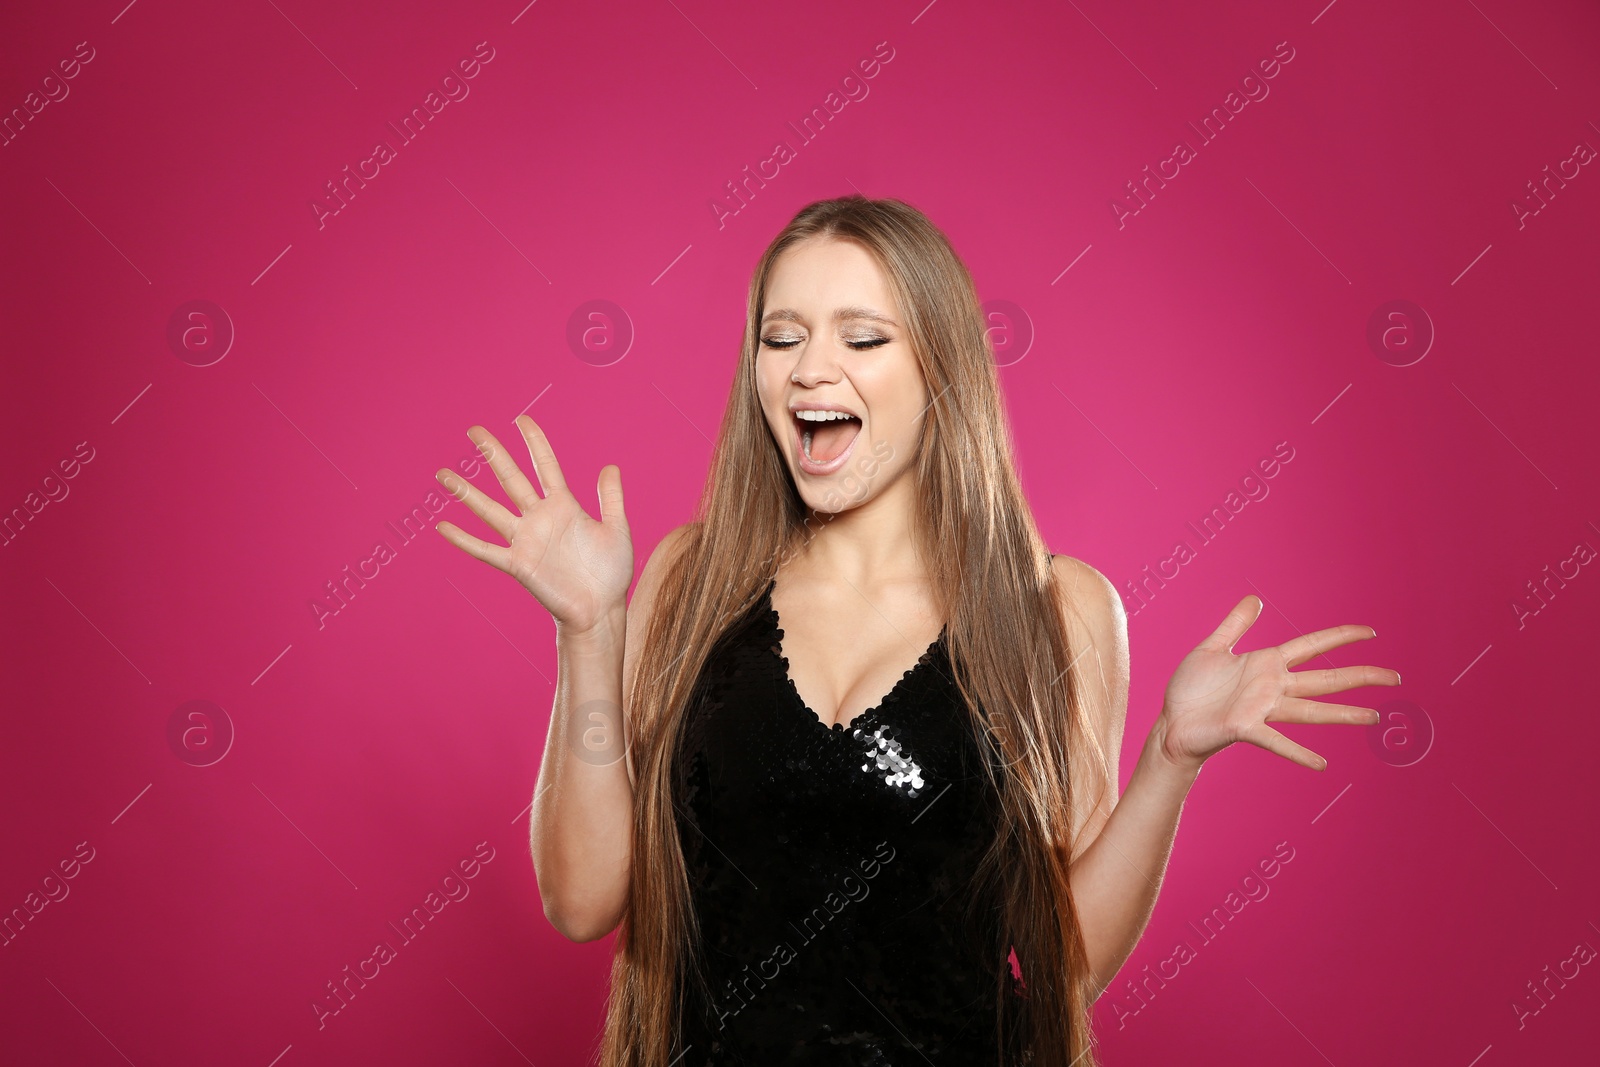 Photo of Portrait of emotional woman on colorful background